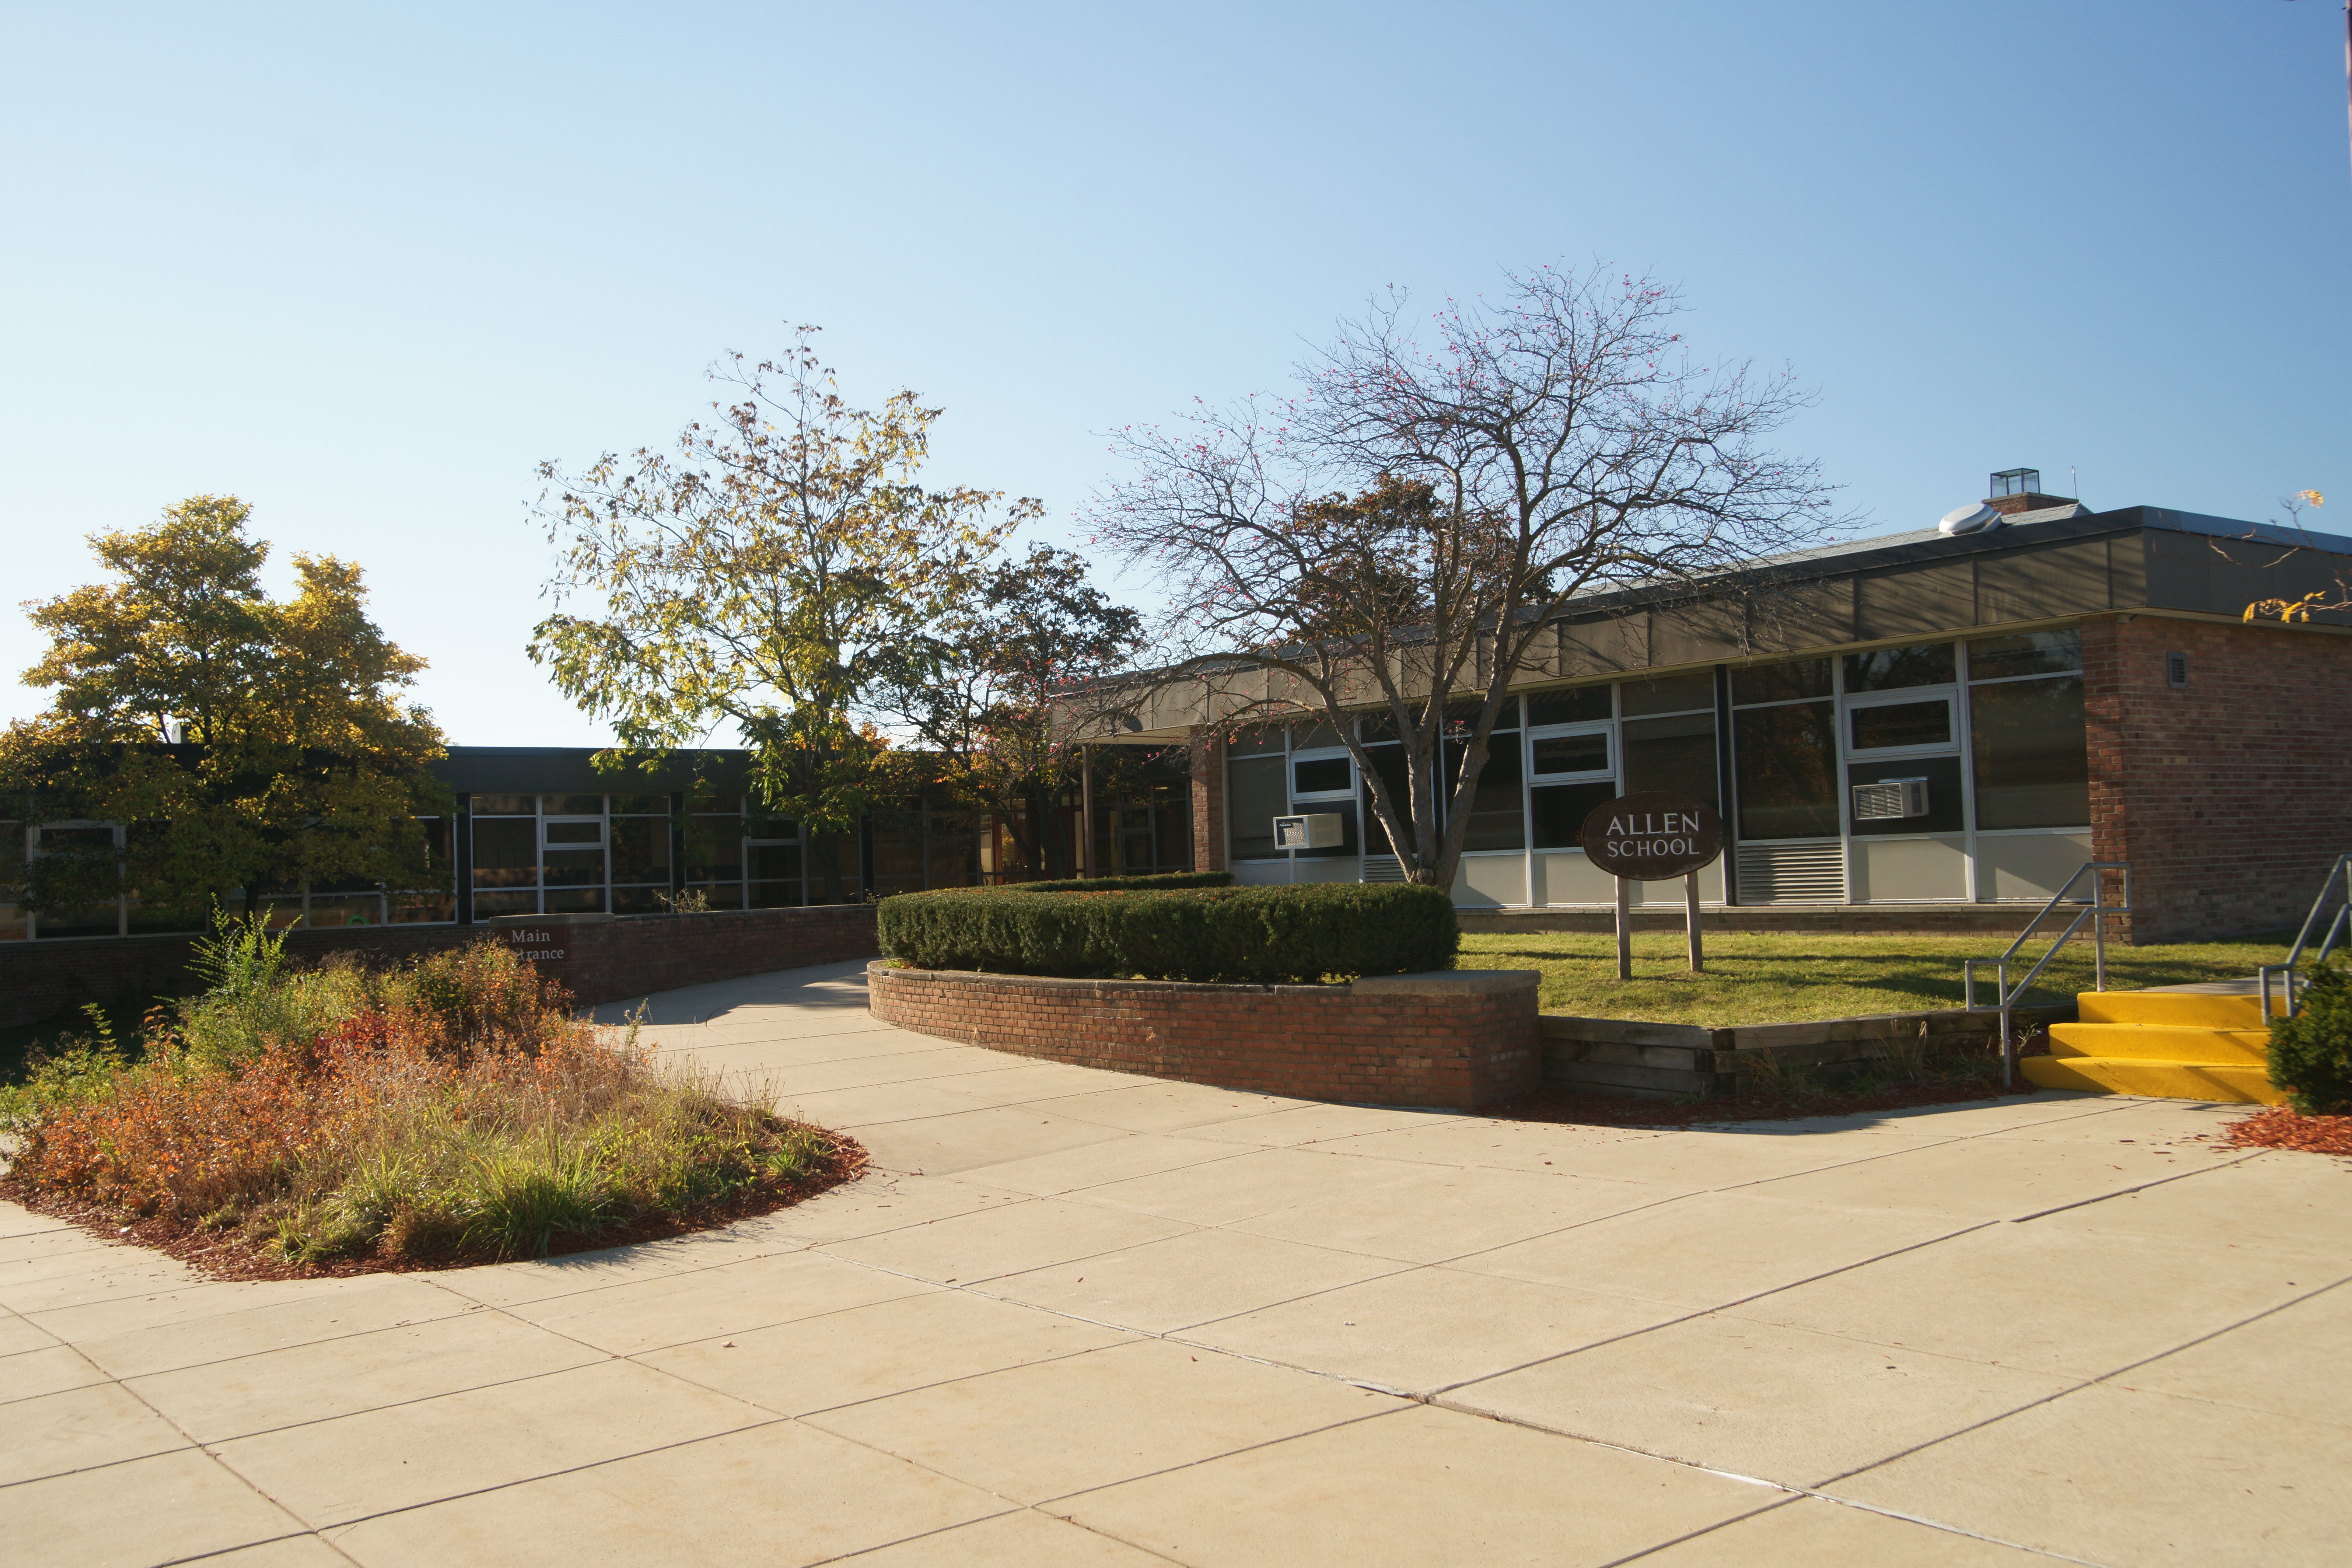 Exterior shot of Allen Elementary school on a sunny day